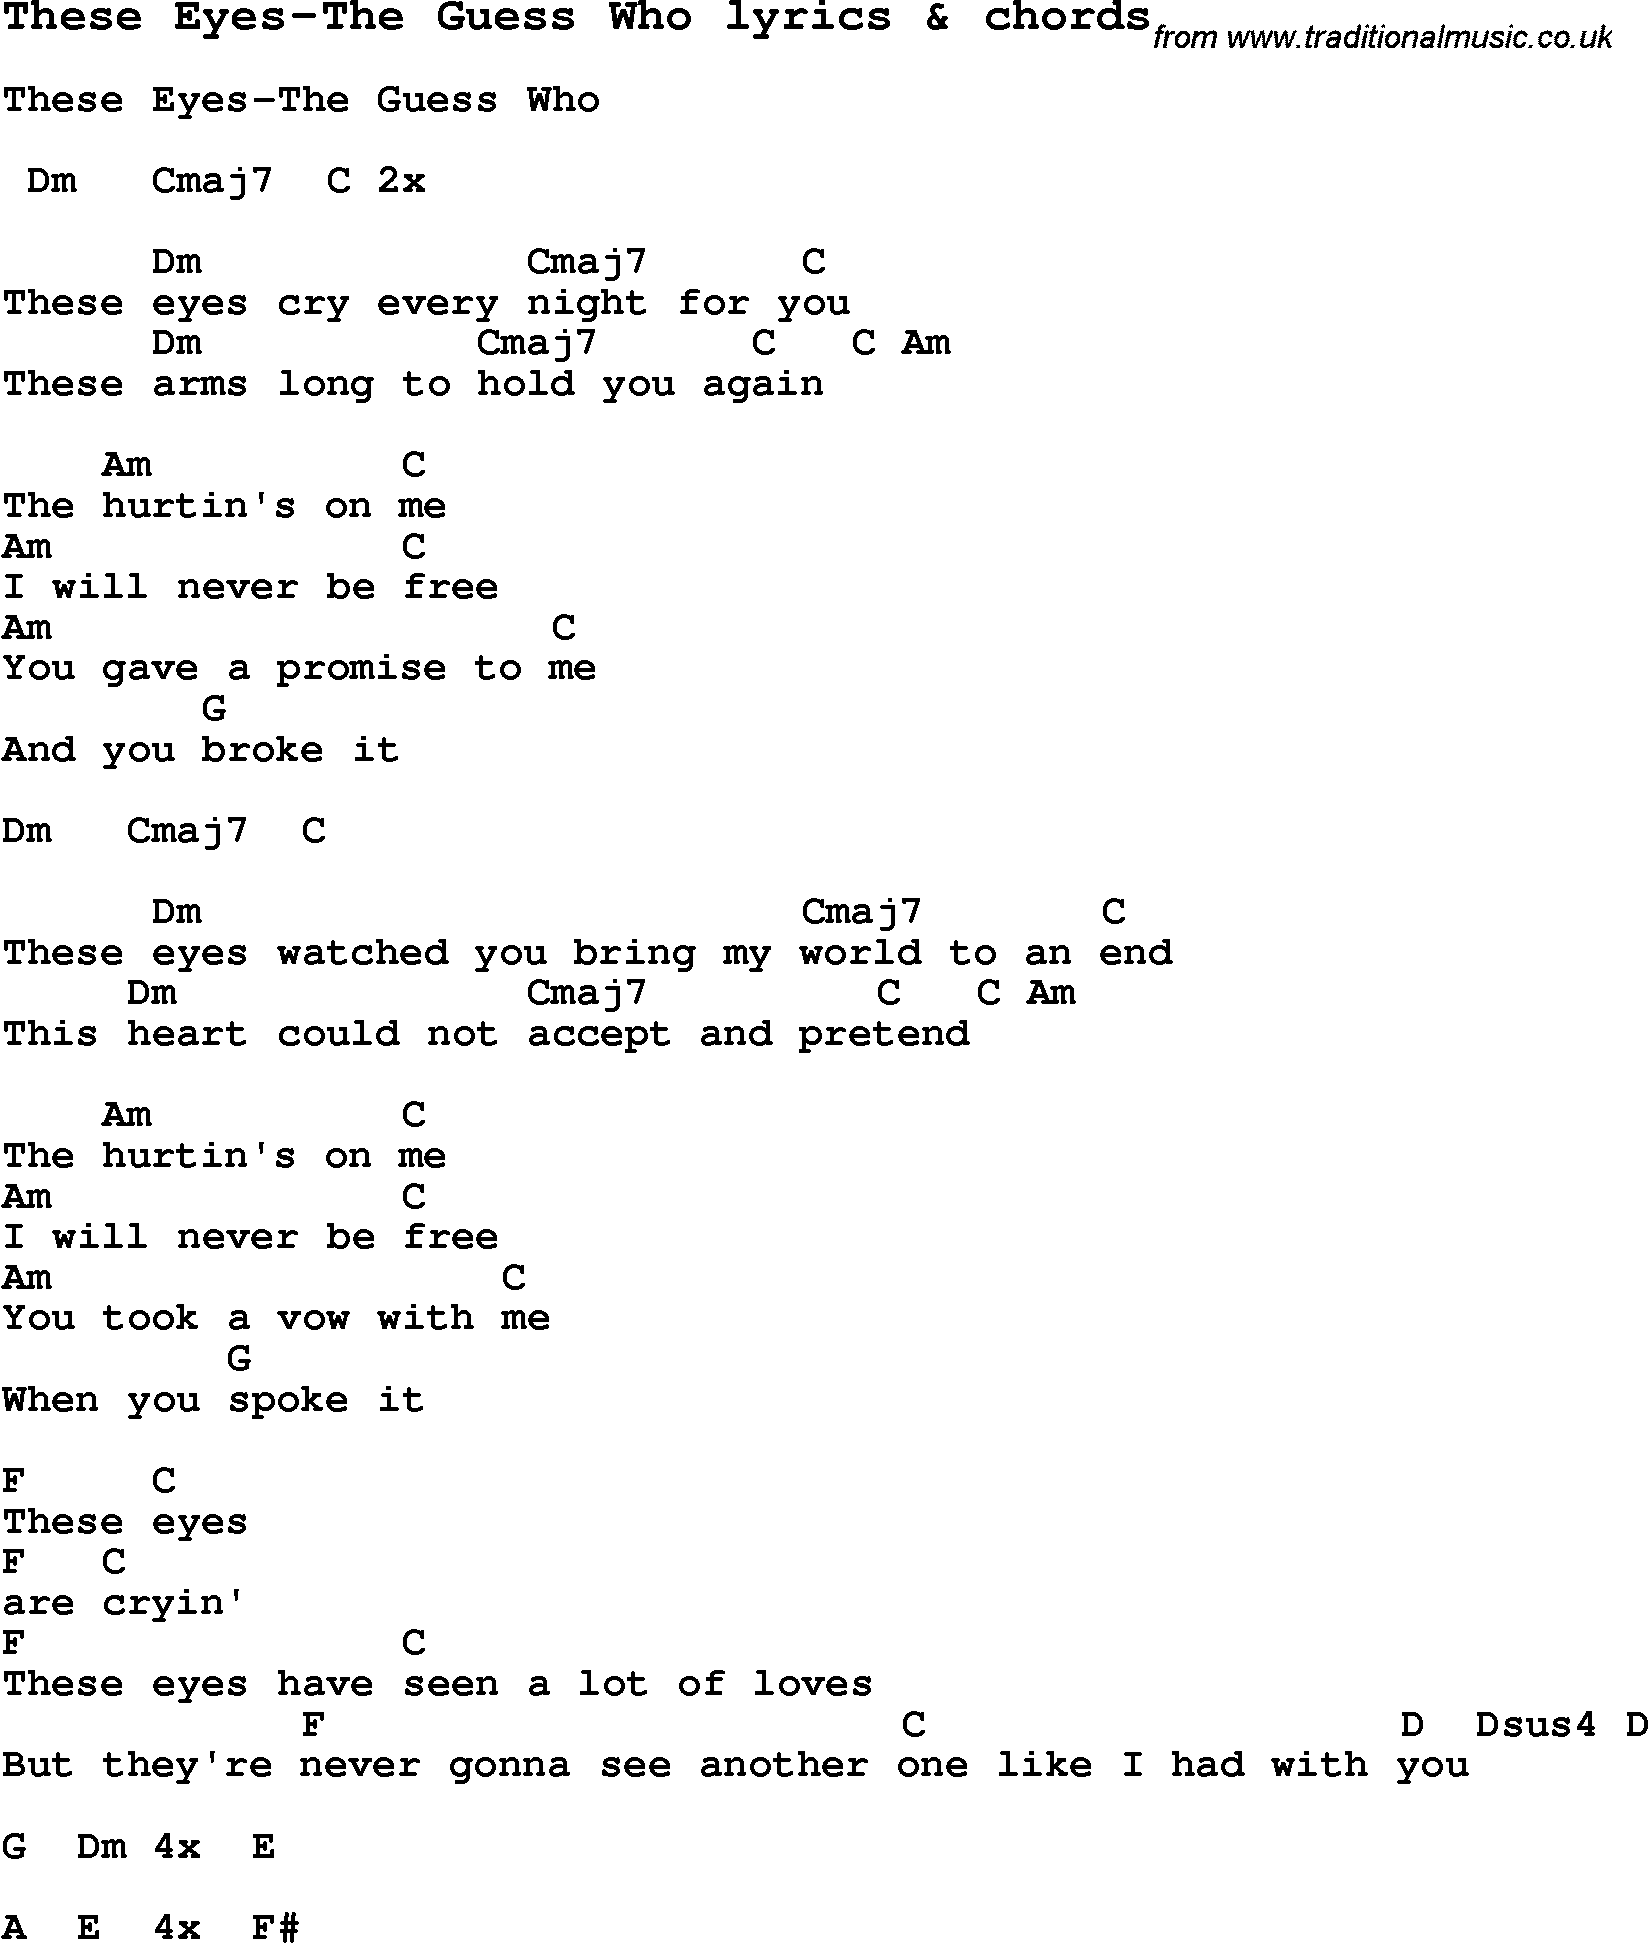 Love Song Lyrics for: These Eyes-The Guess Who with chords for Ukulele, Guitar Banjo etc.